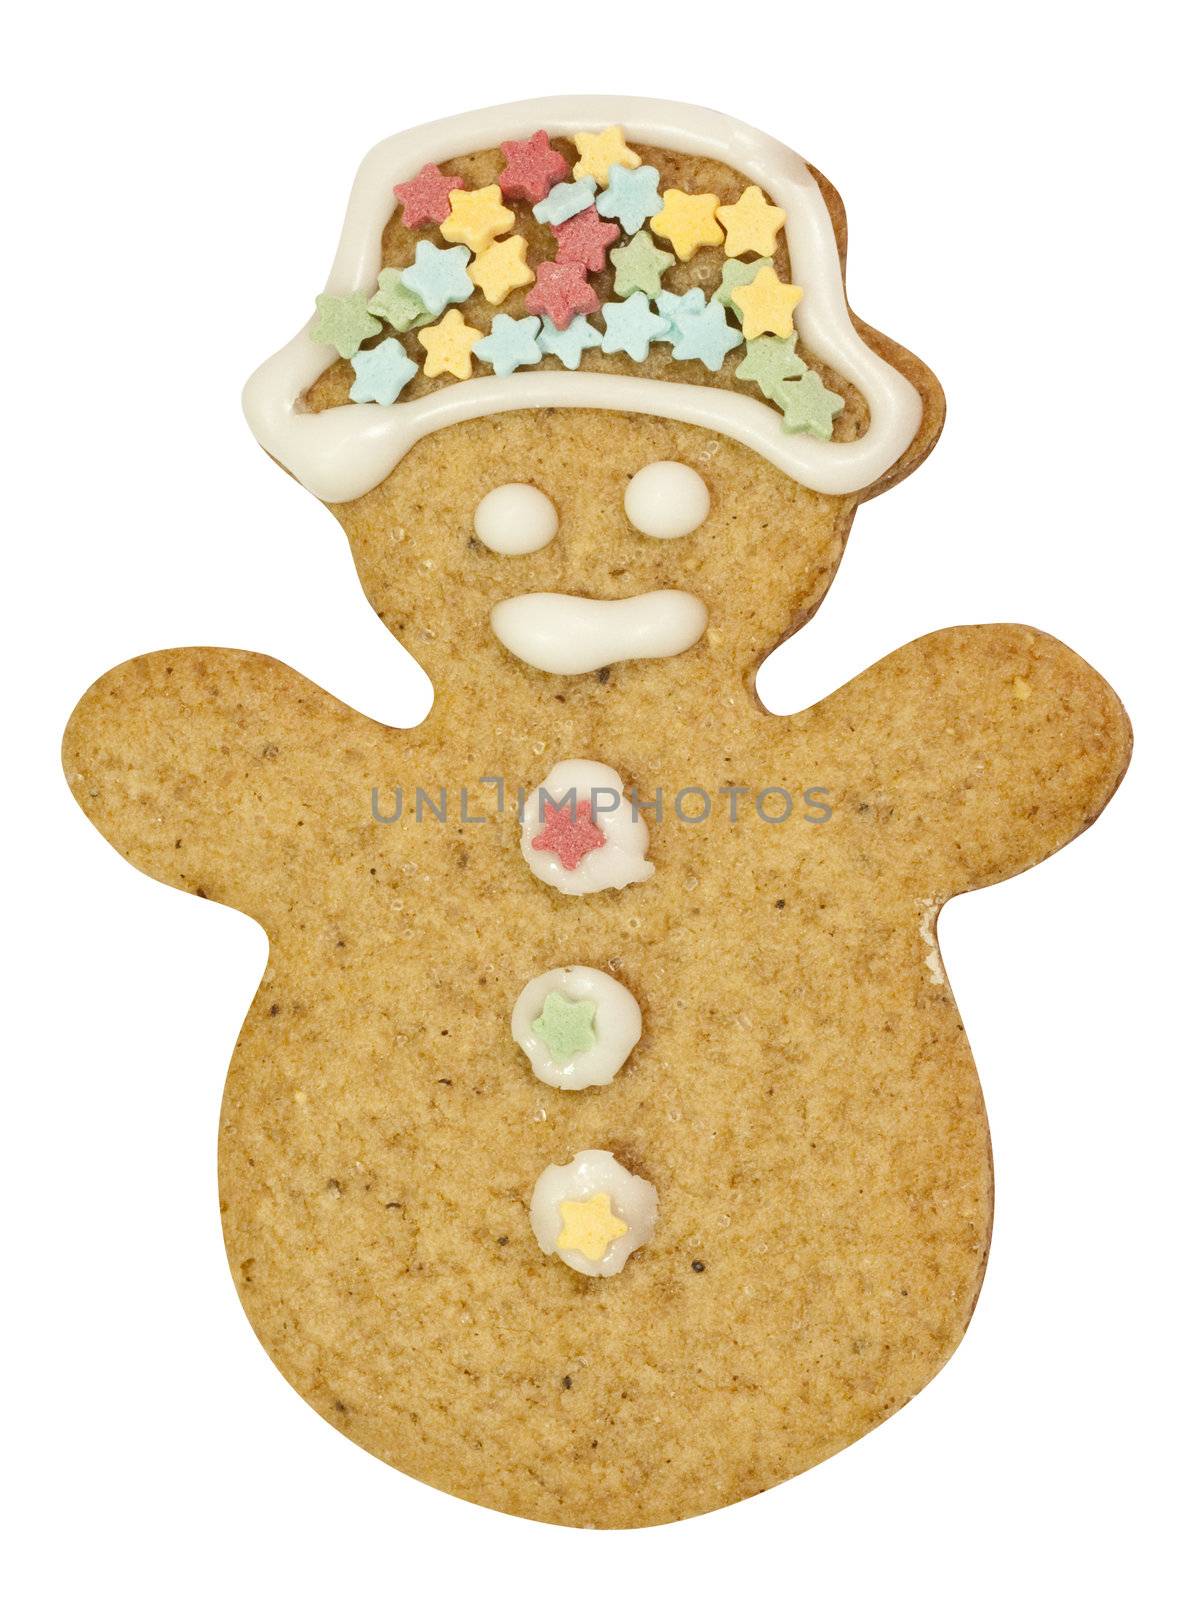 Gingerbread cookie decorated with frosting and stars